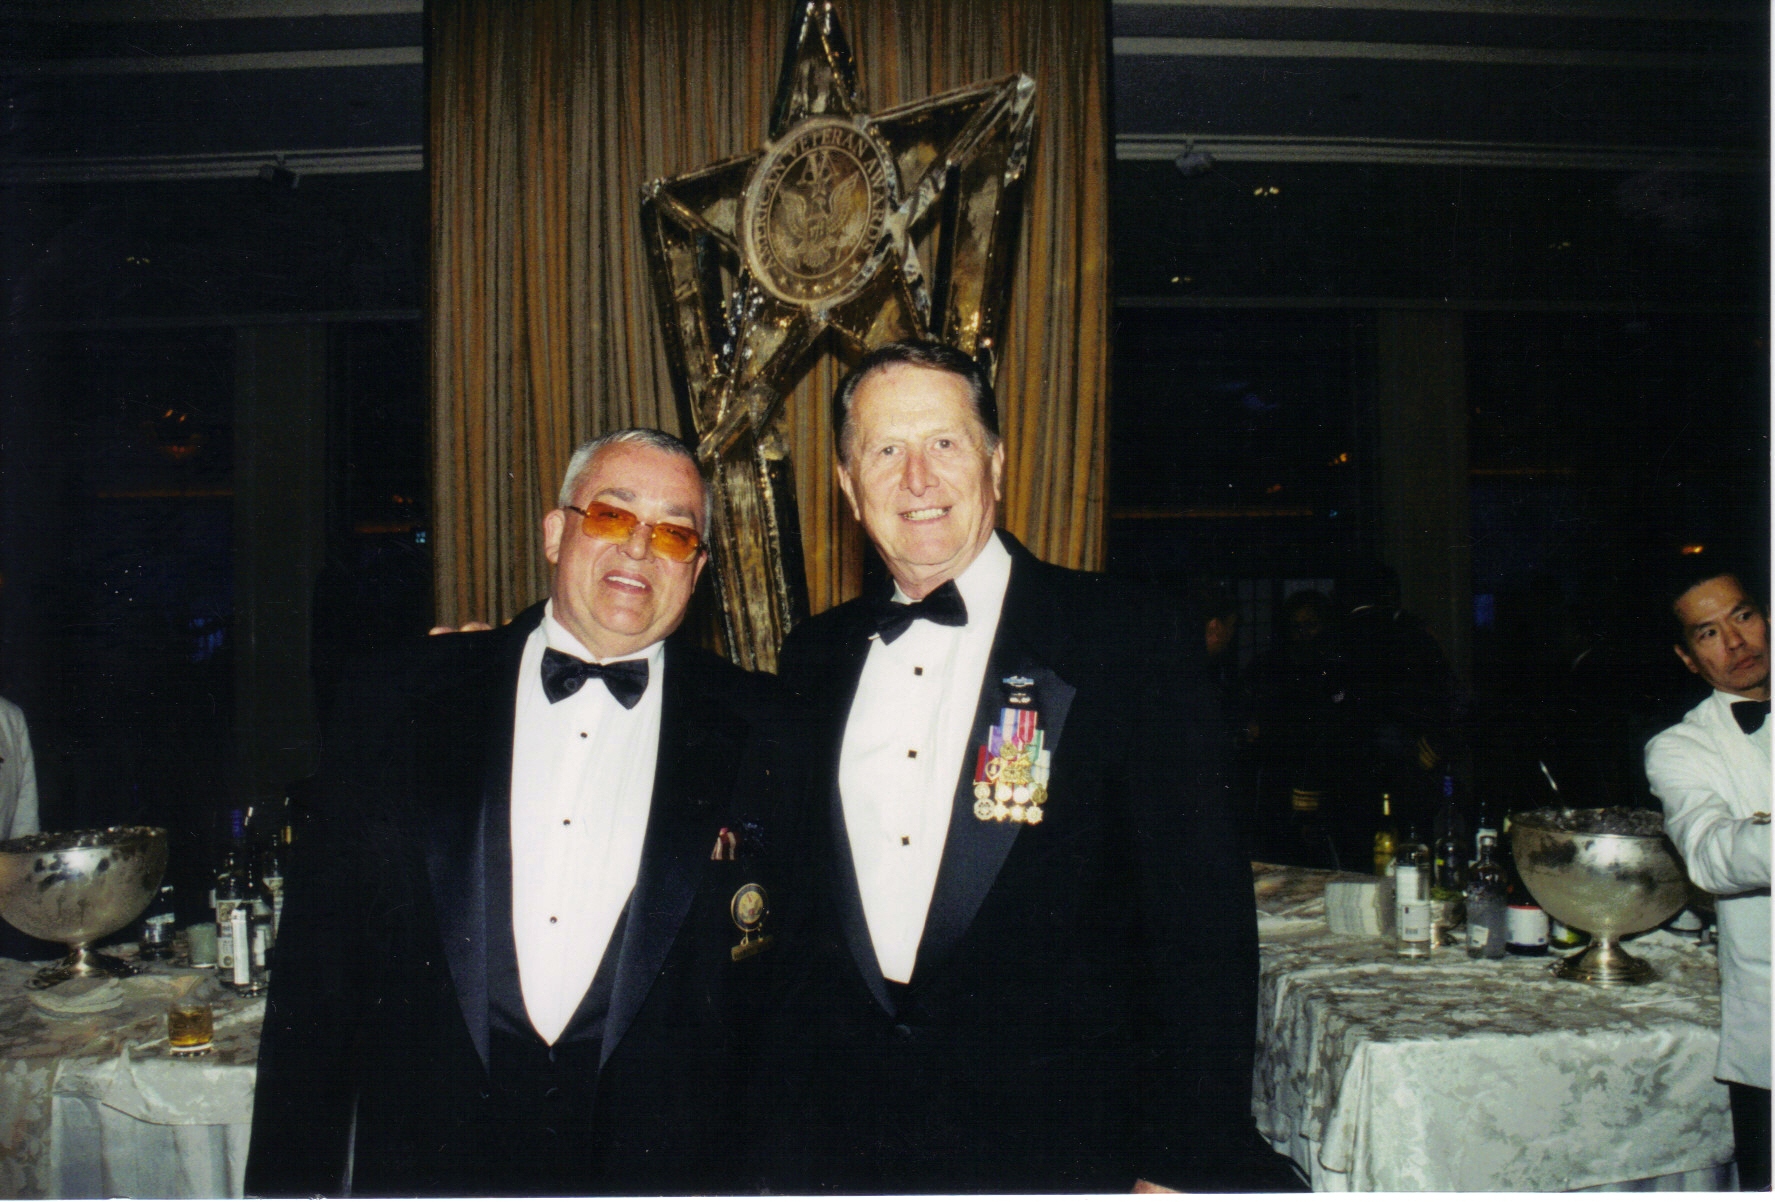 Harry and then-acting Secretary of the Department of Veterans Affairs Herschel Gober